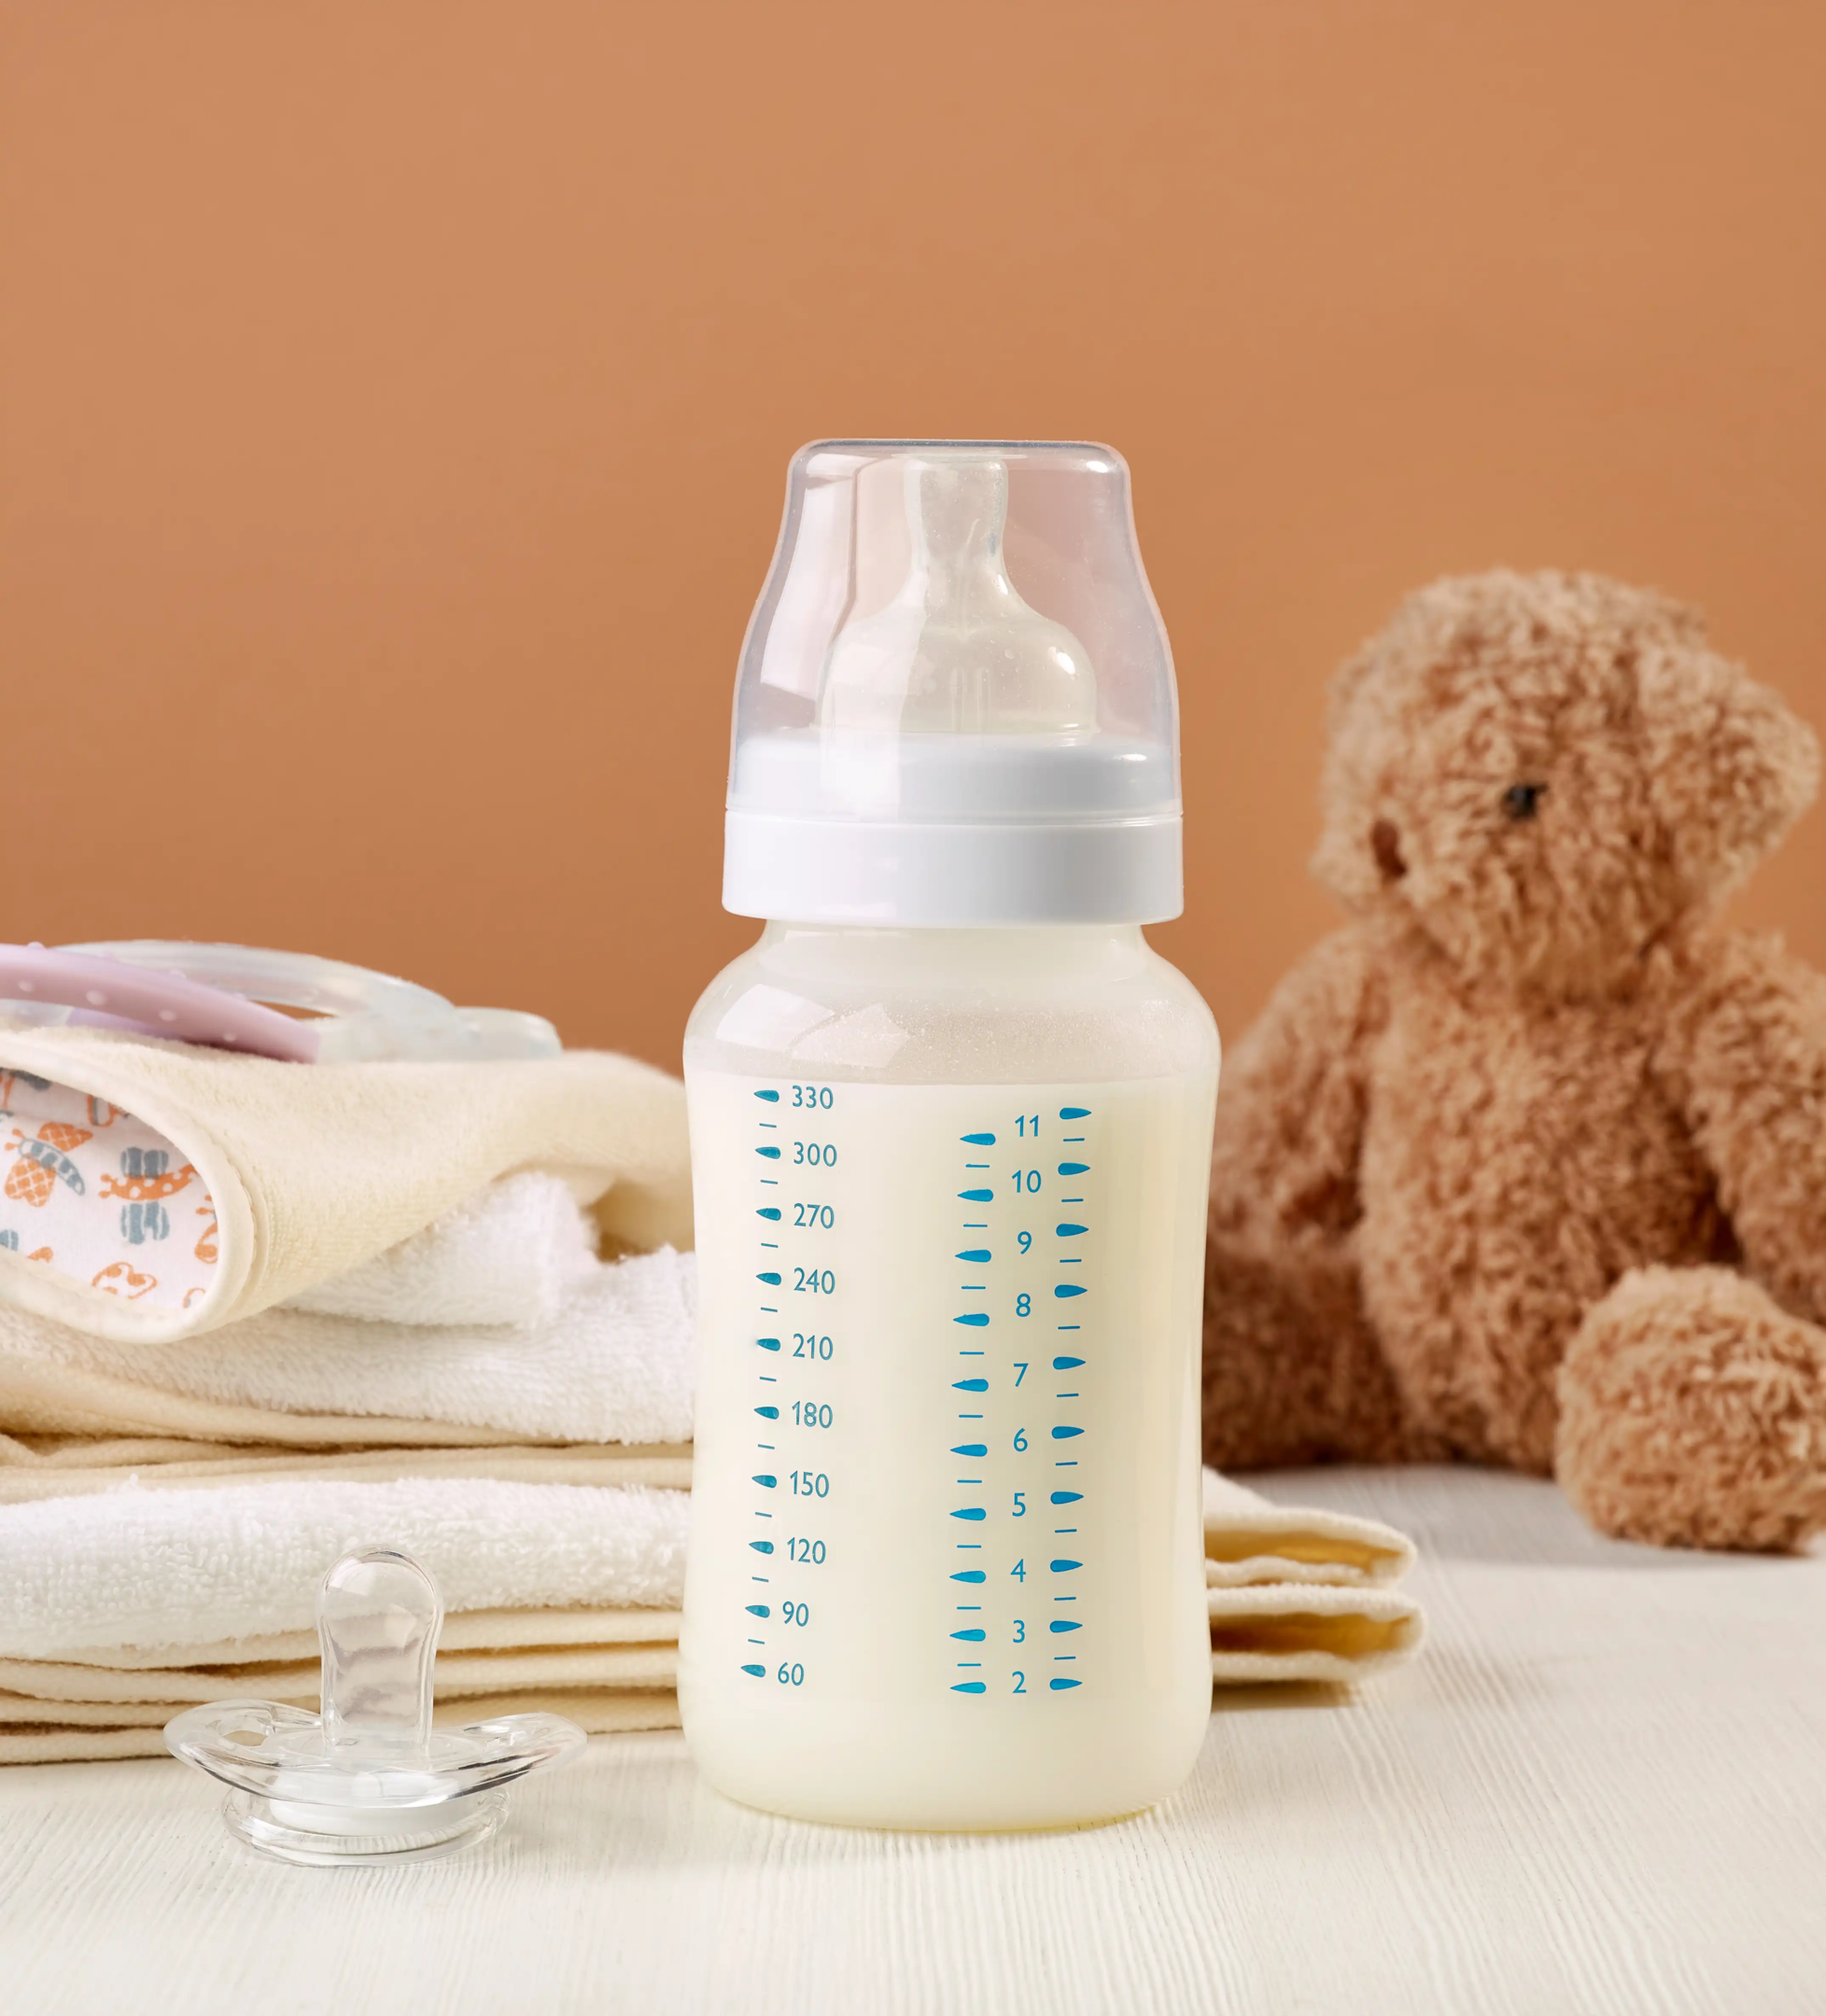 maternity and baby products